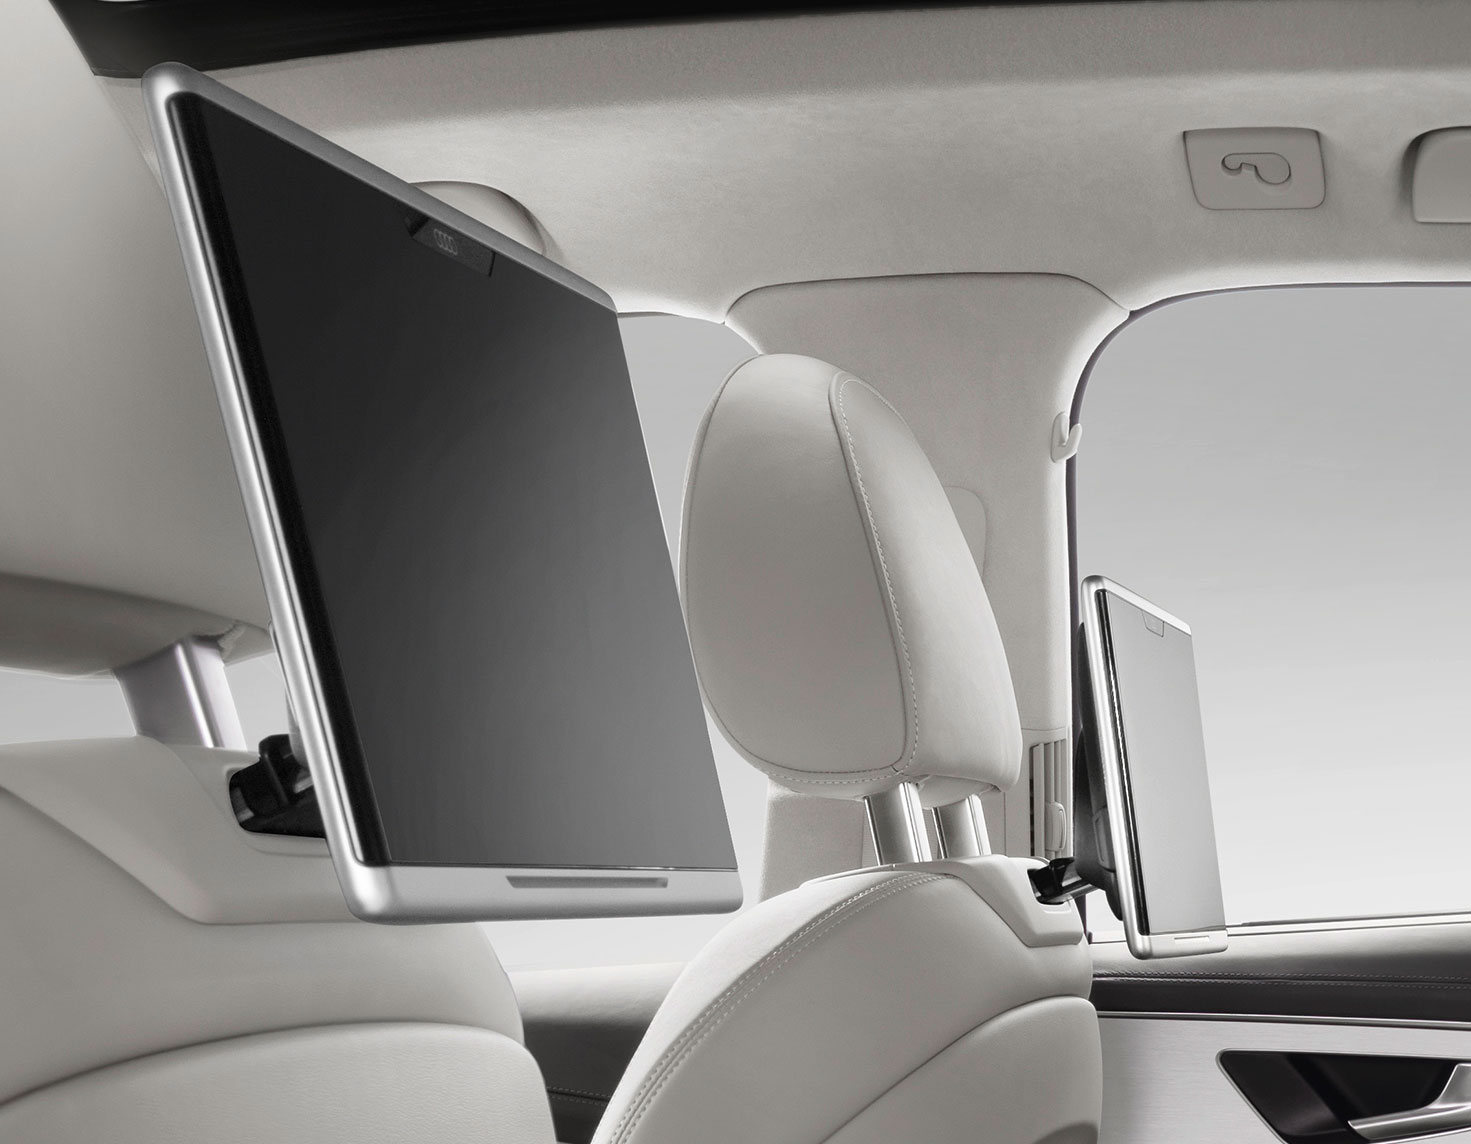 Audi India on X: The Rear Seat Entertainment system in the Audi